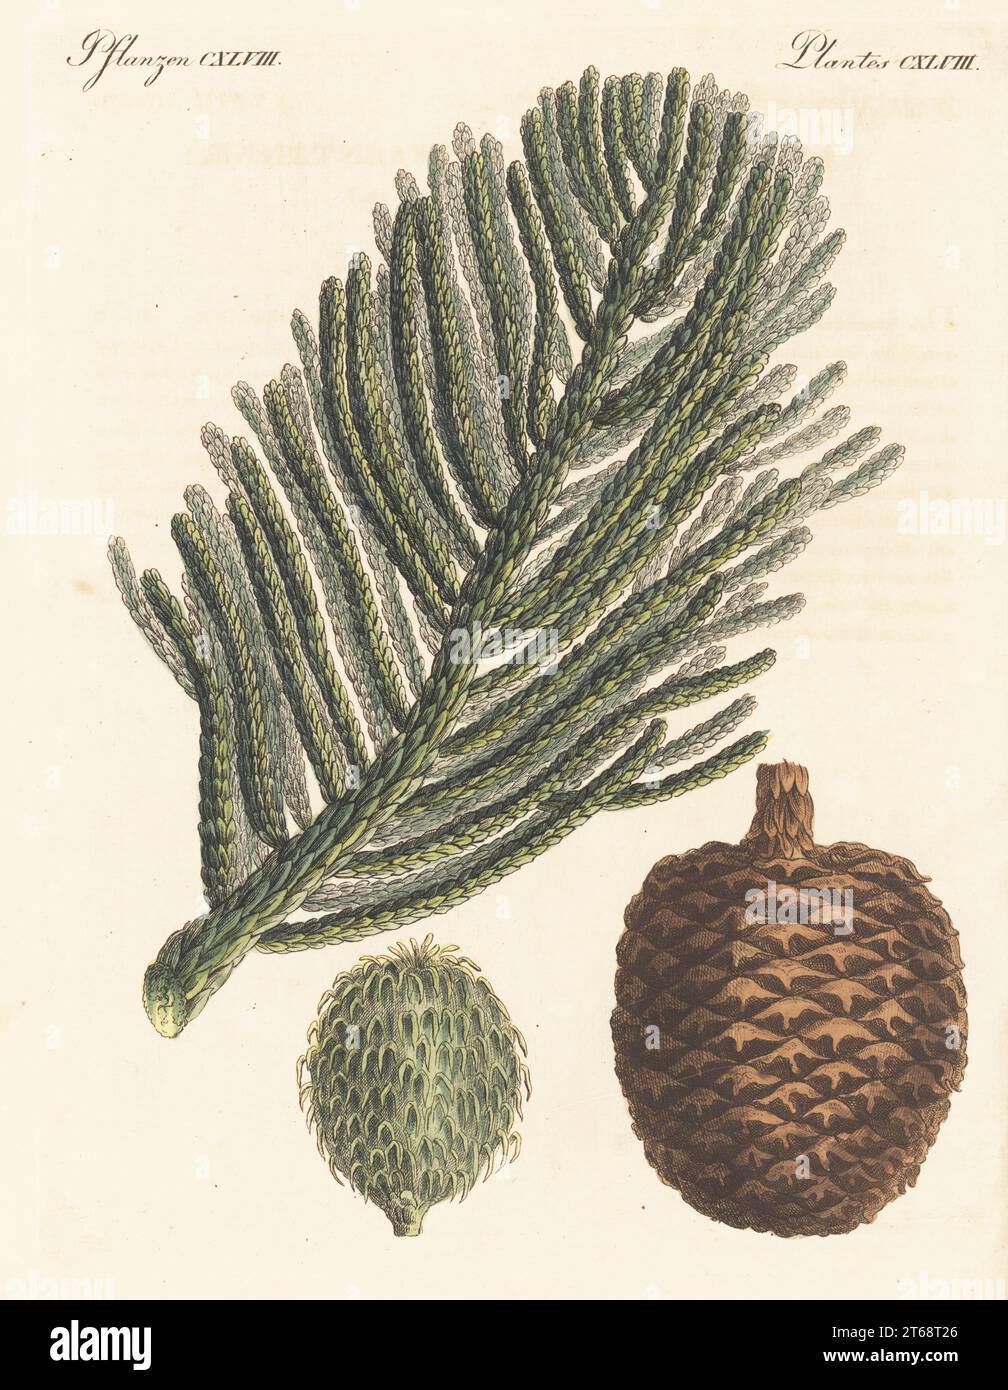 Norfolk Island pine or Norfolk pine, Araucaria heterophylla. Branch with needles and pine cone. Le Sapin-geant des terres Australes, Araucaria excelsa. Copied from a botanical by Ferdinand Bauer in Aylmer Lambert's Description of the Genus Pinus, 1803. Handcoloured copperplate engraving from Carl Bertuch's Bilderbuch fur Kinder (Picture Book for Children), Weimar, 1815. A 12-volume encyclopedia for children illustrated with almost 1,200 engraved plates on natural history, science, costume, mythology, etc., published from 1790-1830. Stock Photo